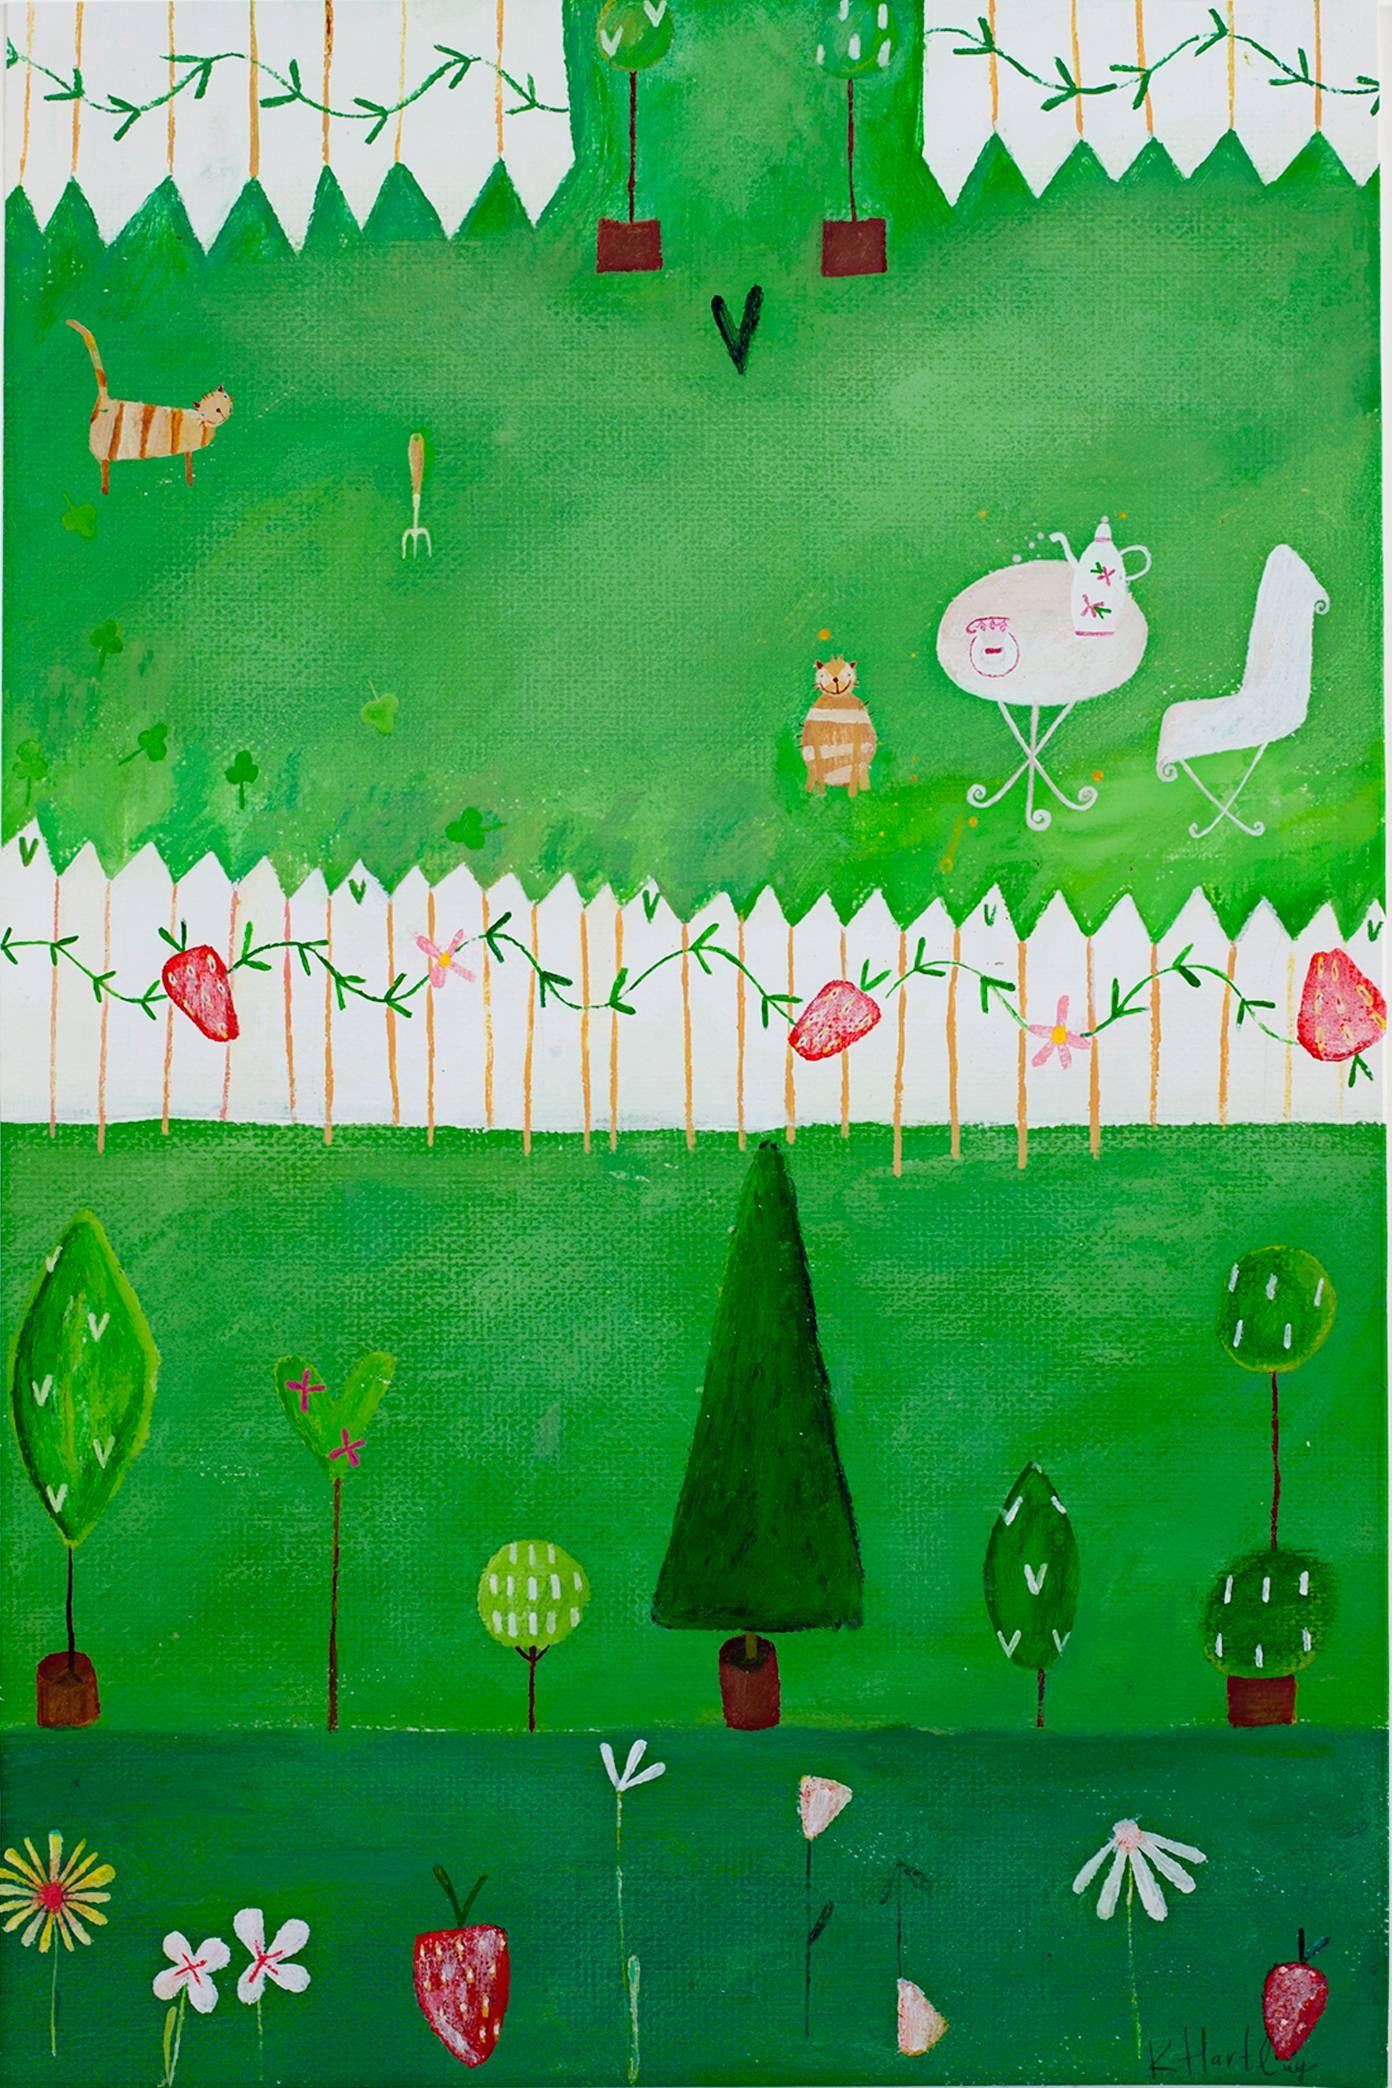 "Green Grass, Picket Fence KMH 008, " an Acrylic & Mixed Media signed by Hartley